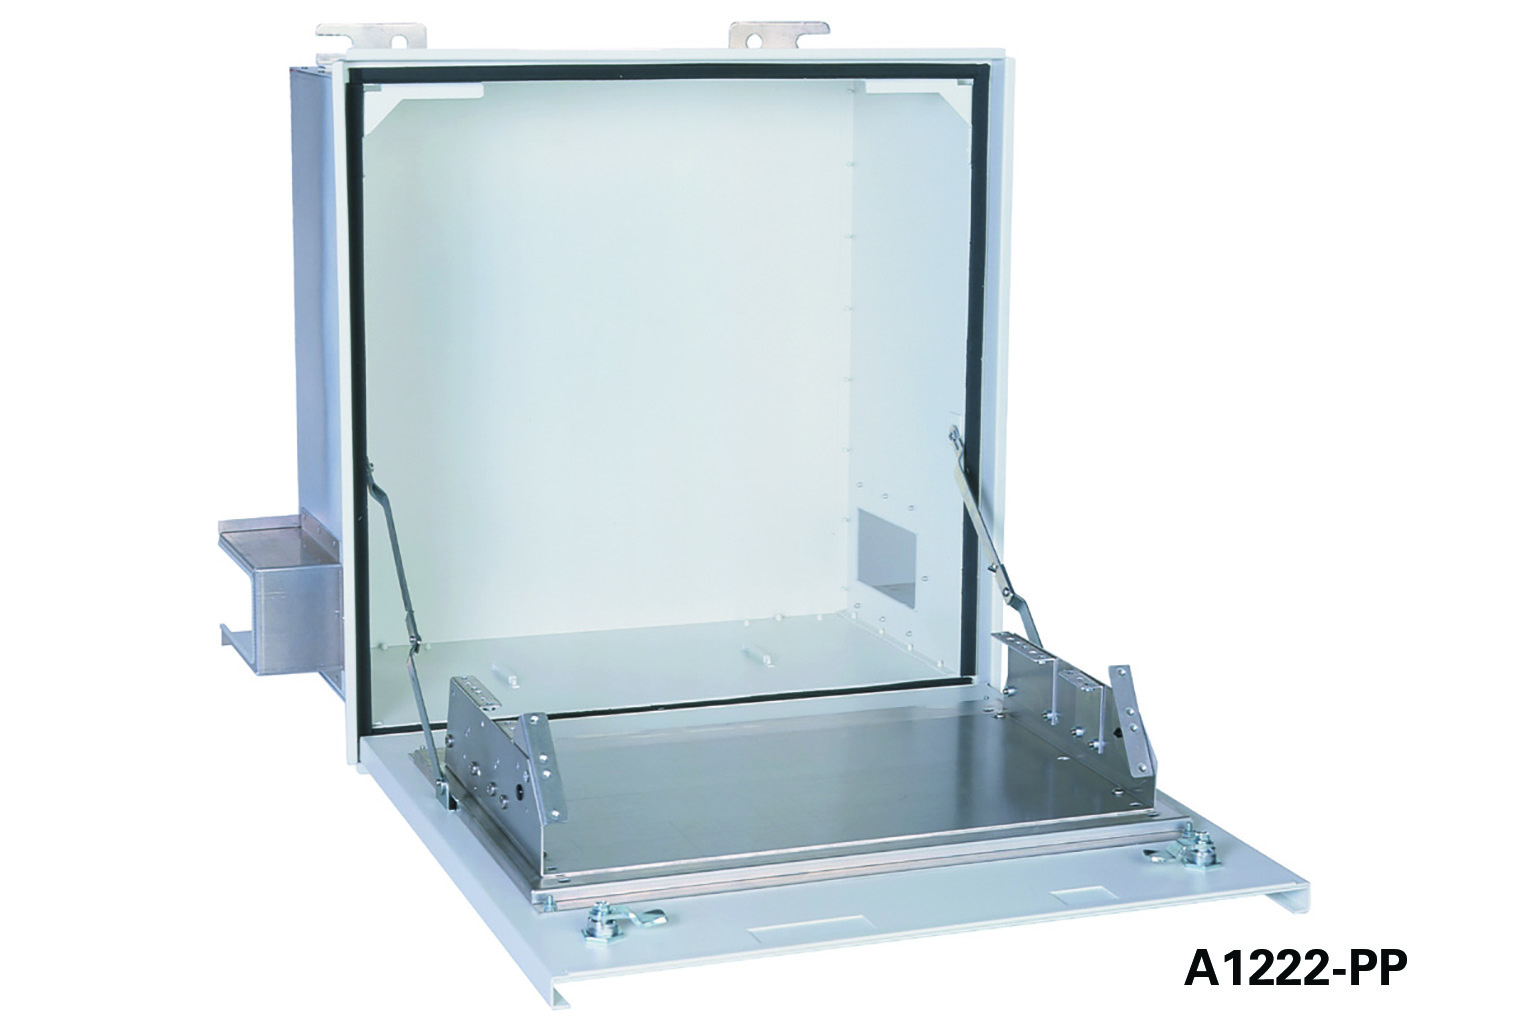 Ceiling Enclosure for Patch Panels - Image 1